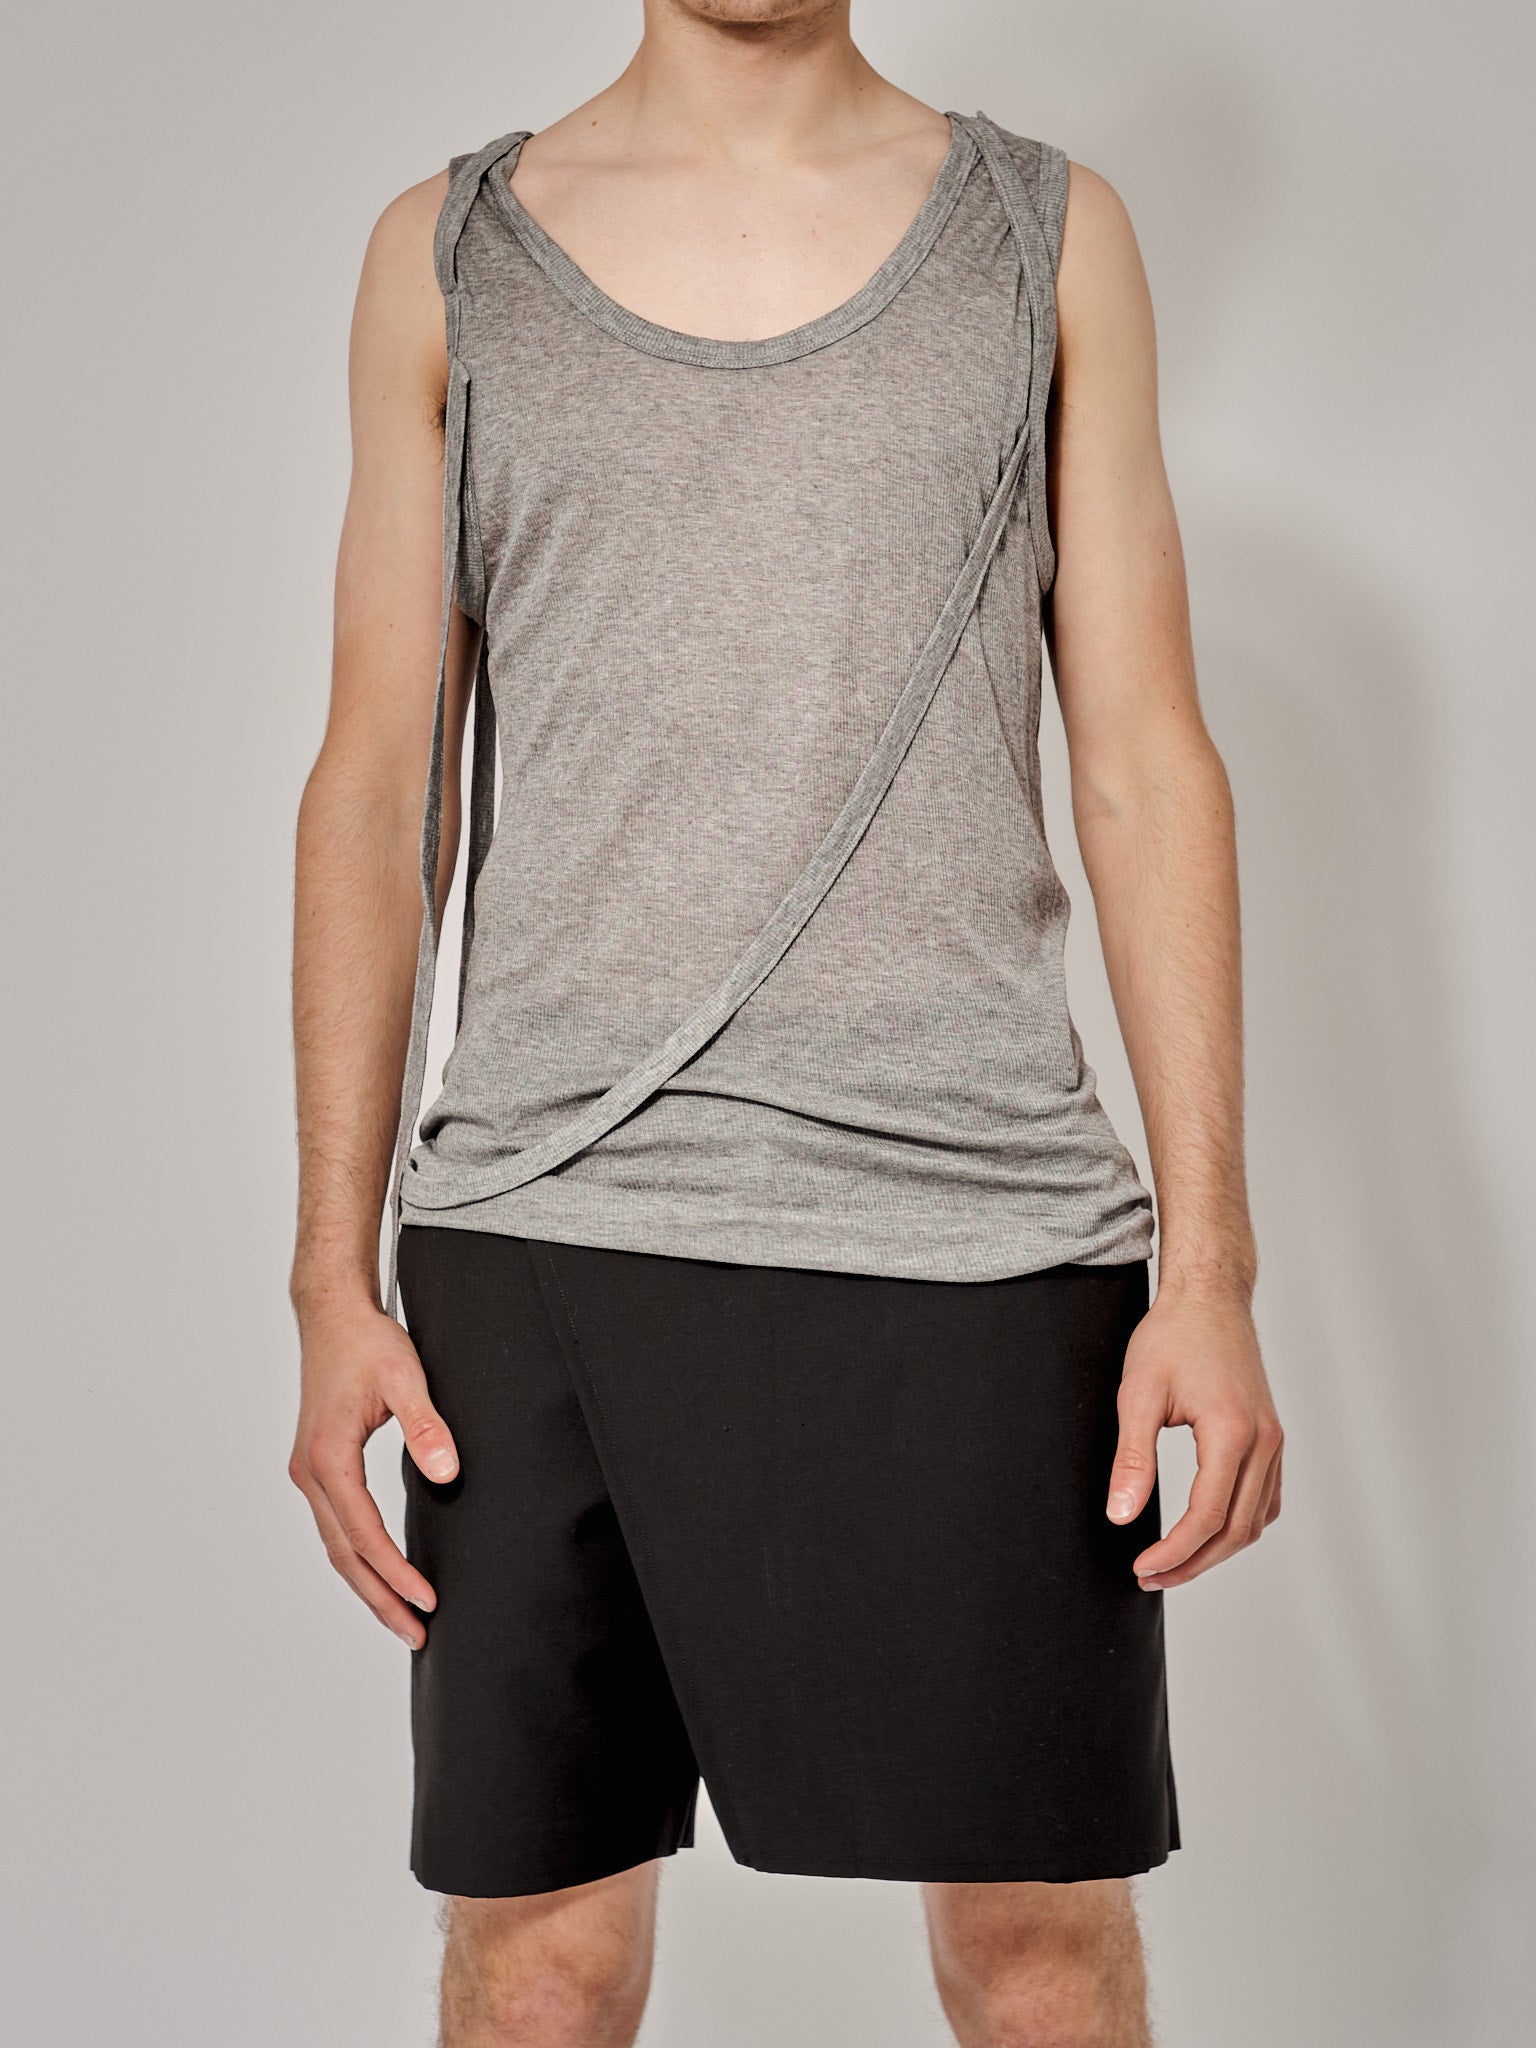 Grey Vest With Crossover Straps